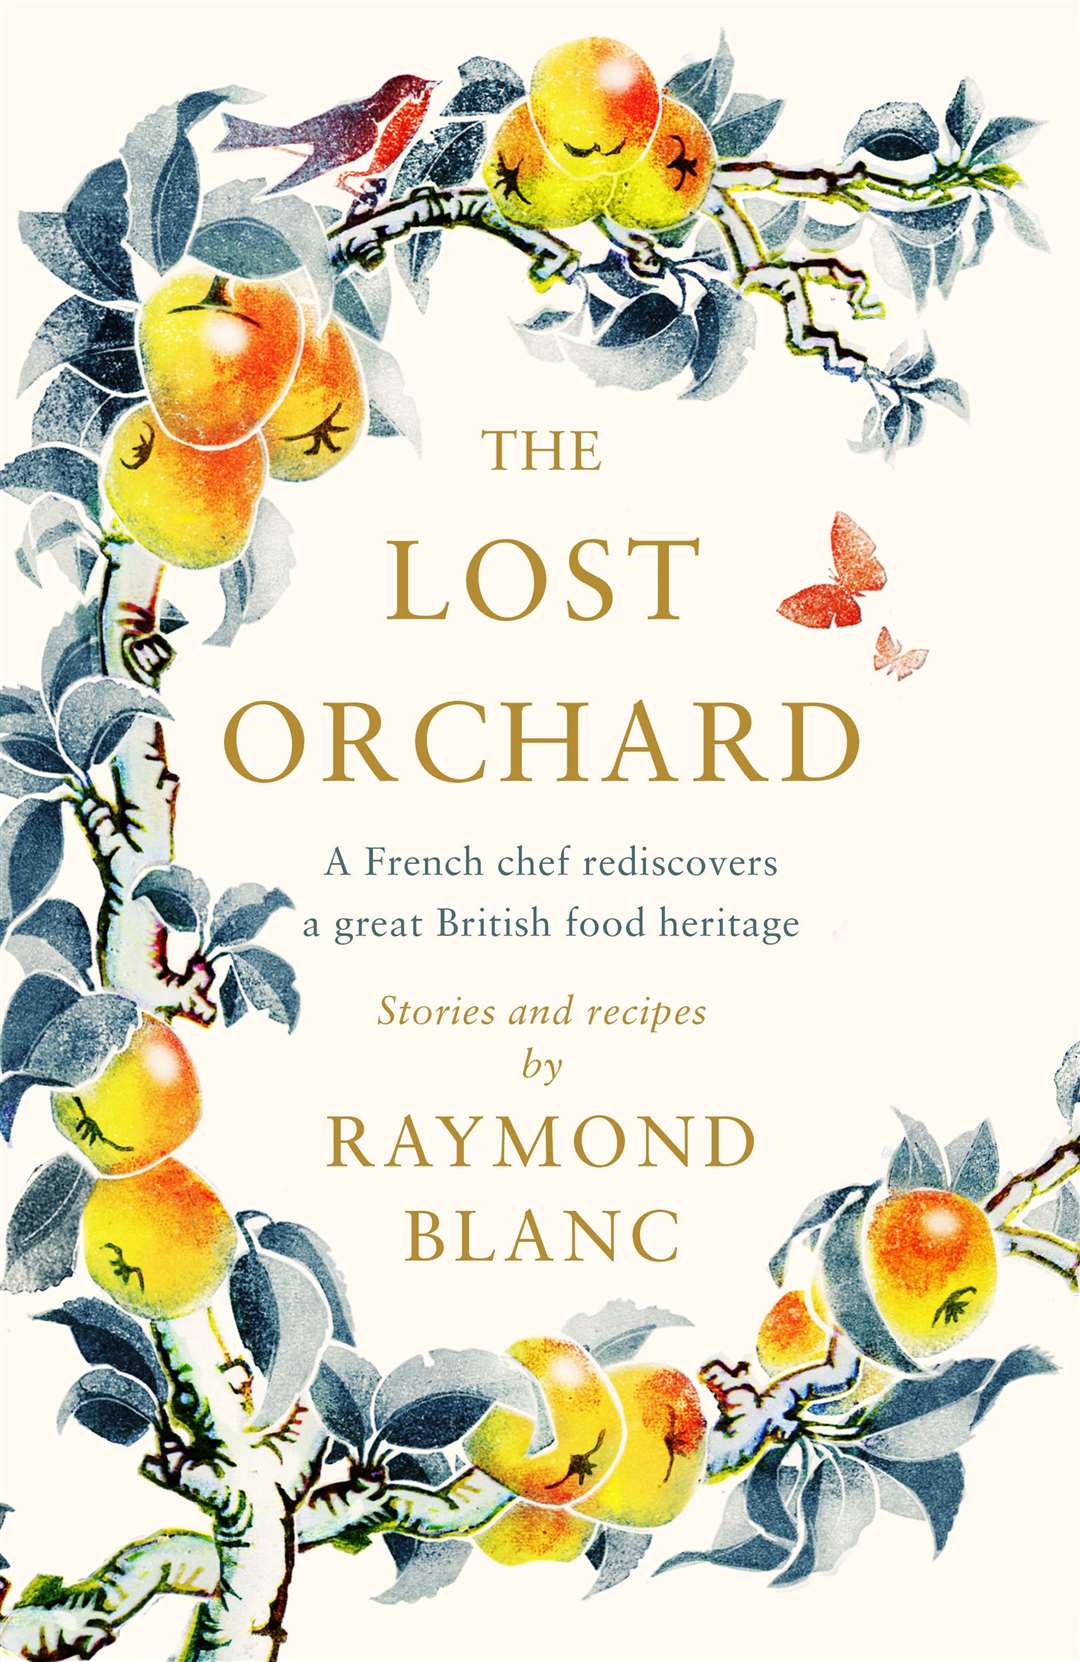 The Lost Orchard by Raymond Blanc.